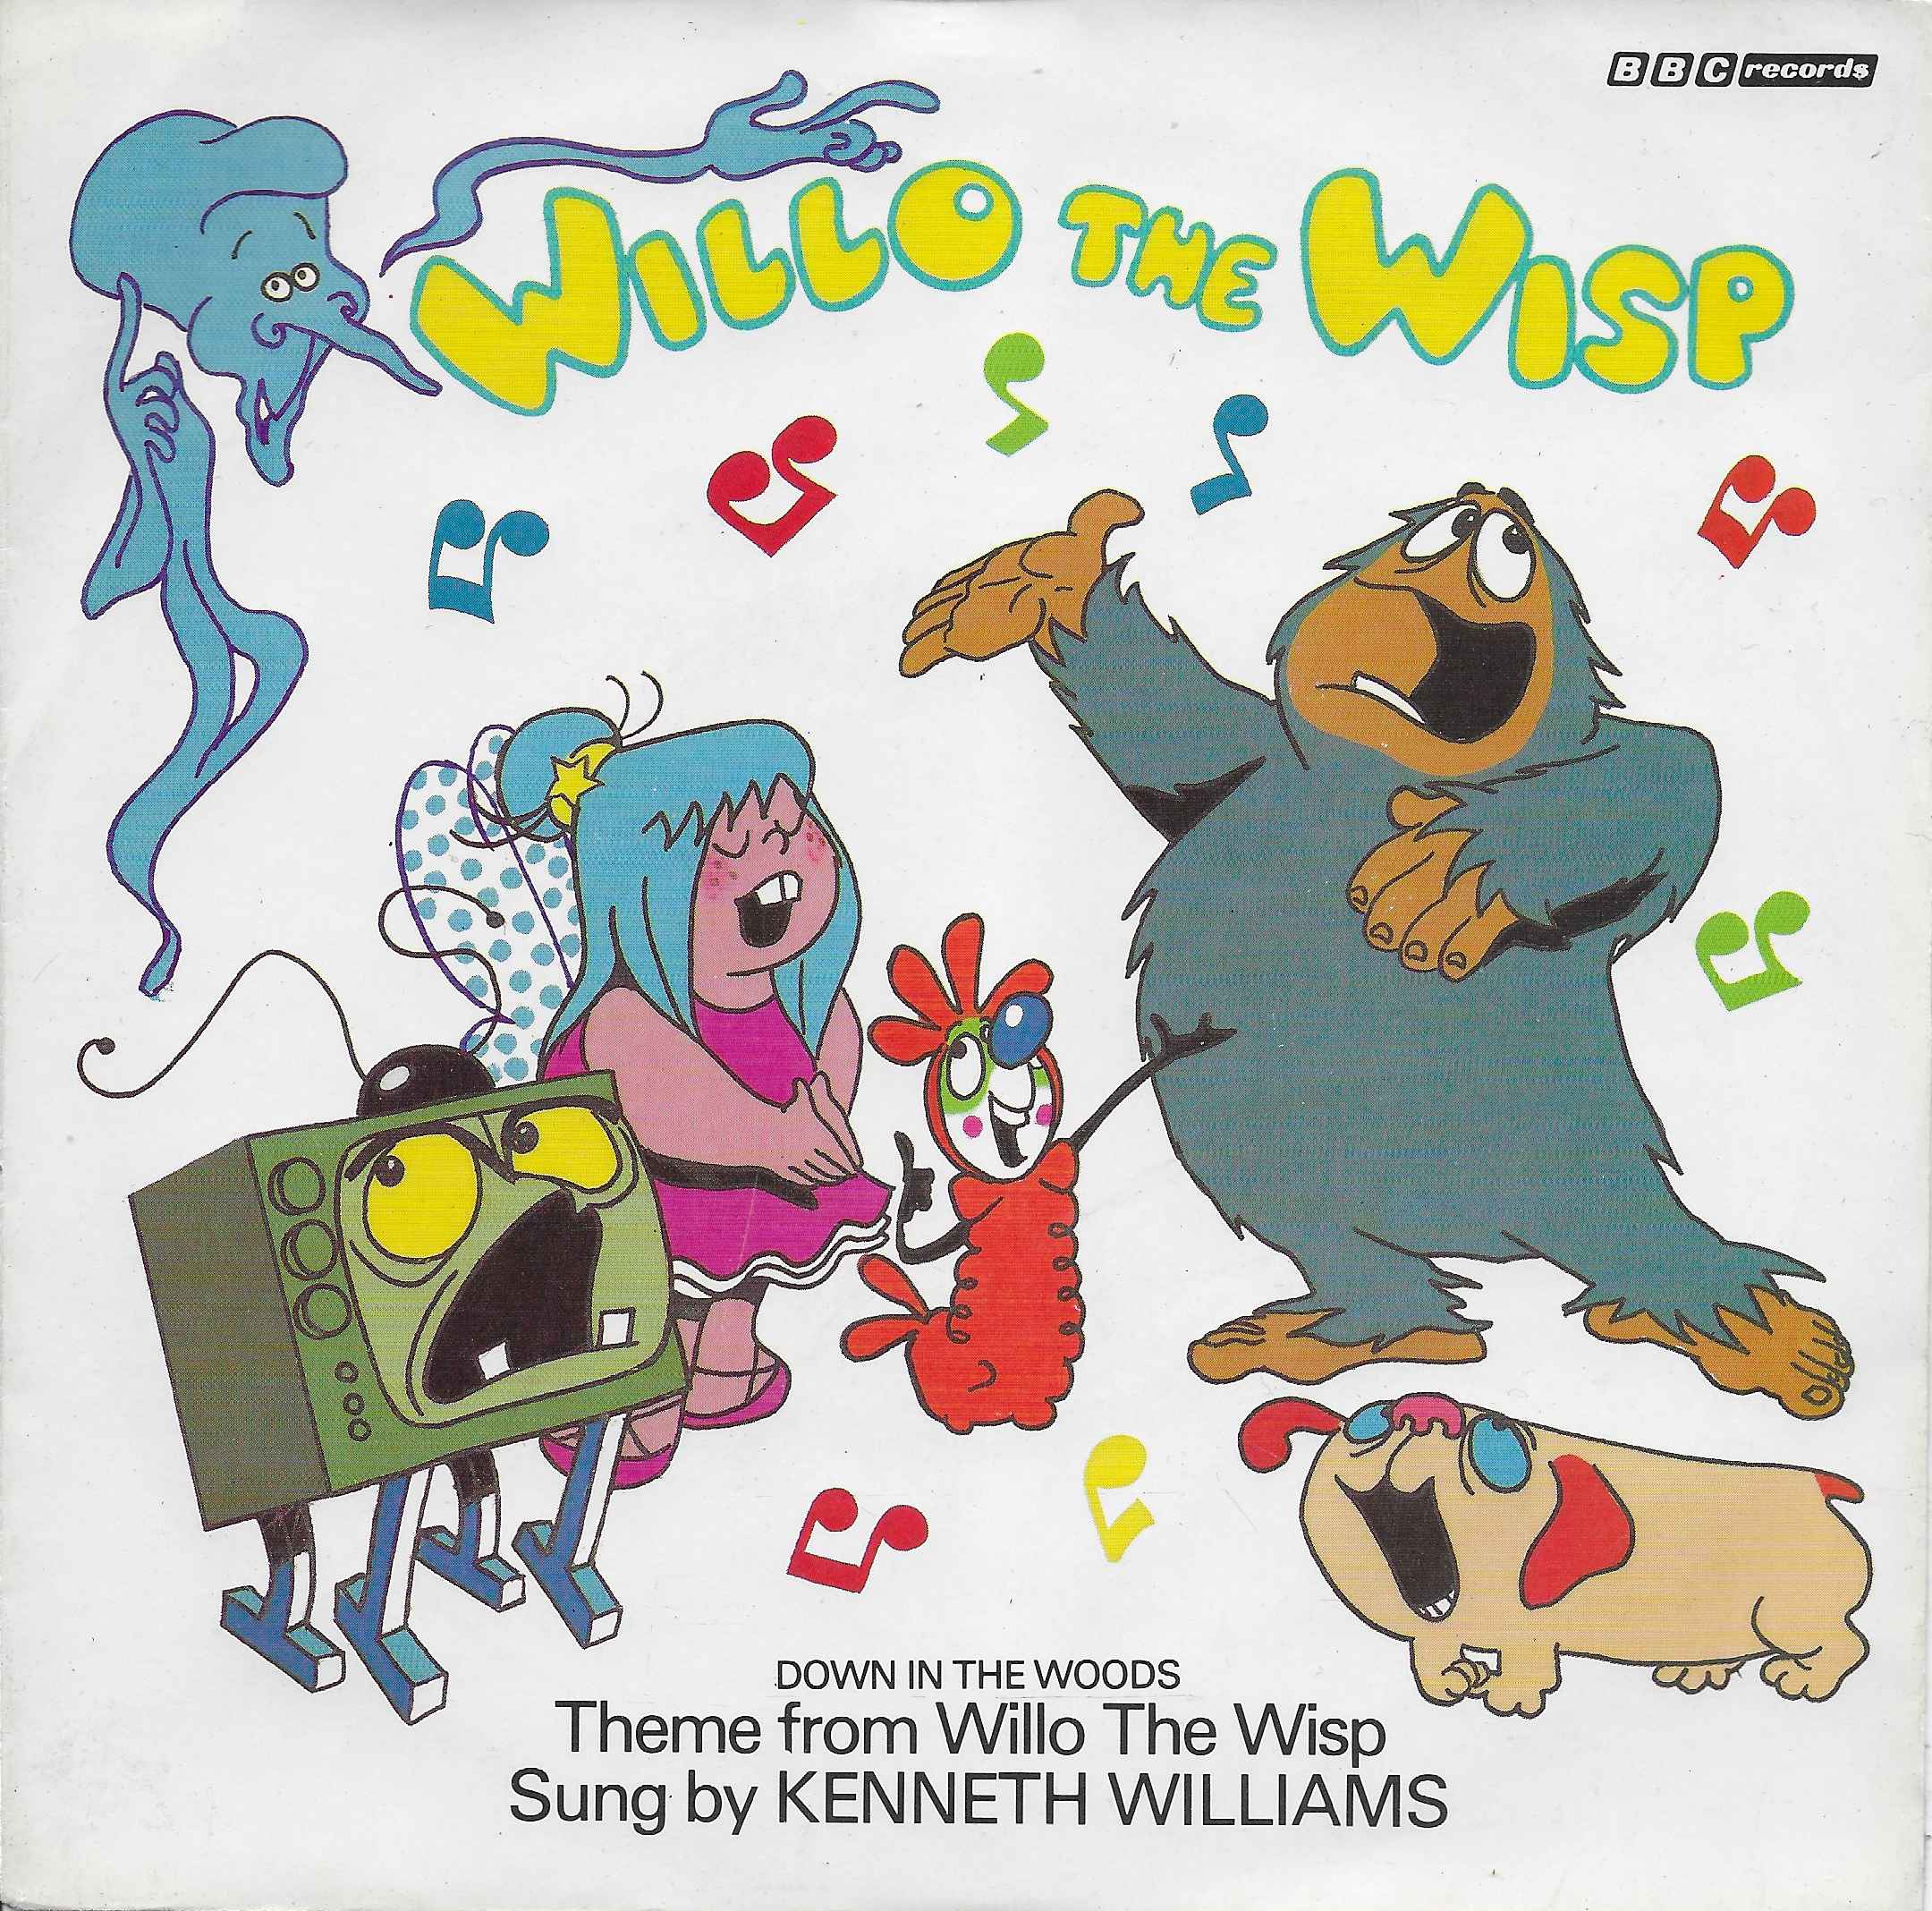 Picture of RESL 136 Down in the woods (Willo the Wisp) by artist Nick Spargo / Tony Kinsey / Kenneth Williams from the BBC singles - Records and Tapes library